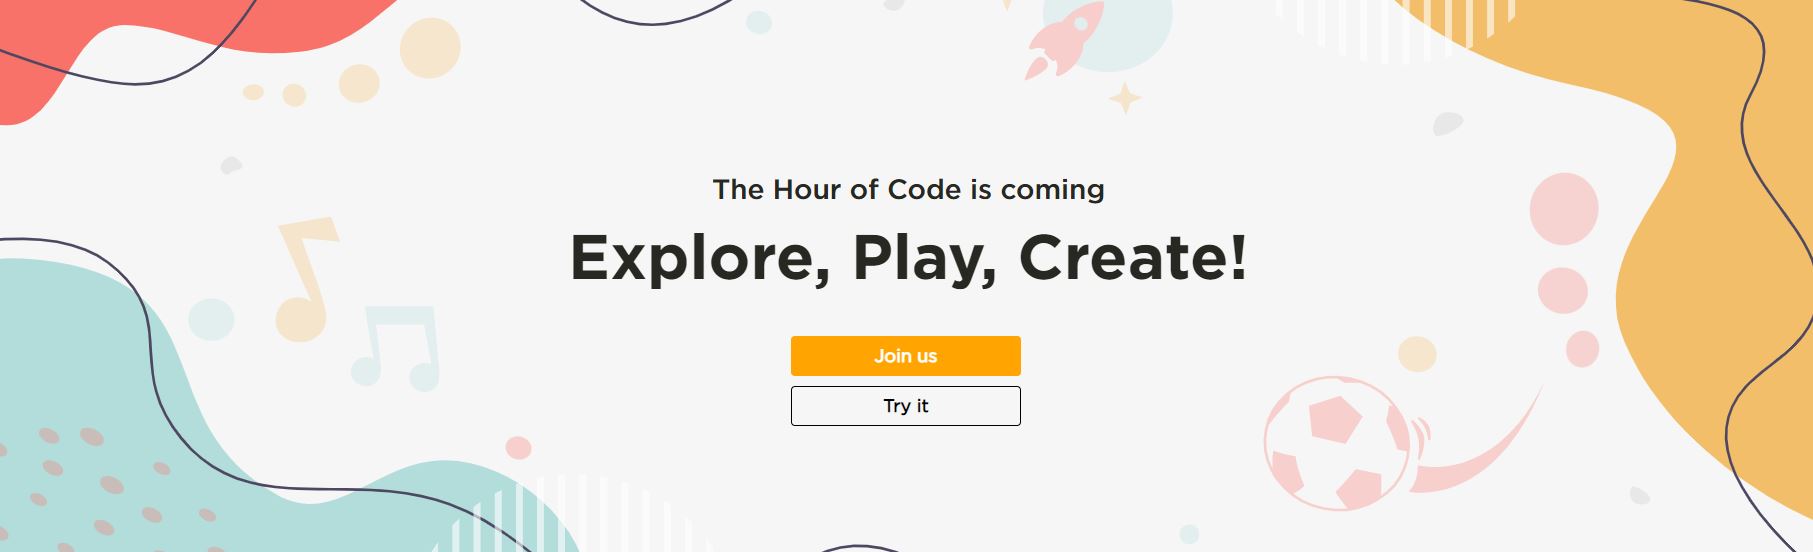 Free coding tutorials and classes for kids